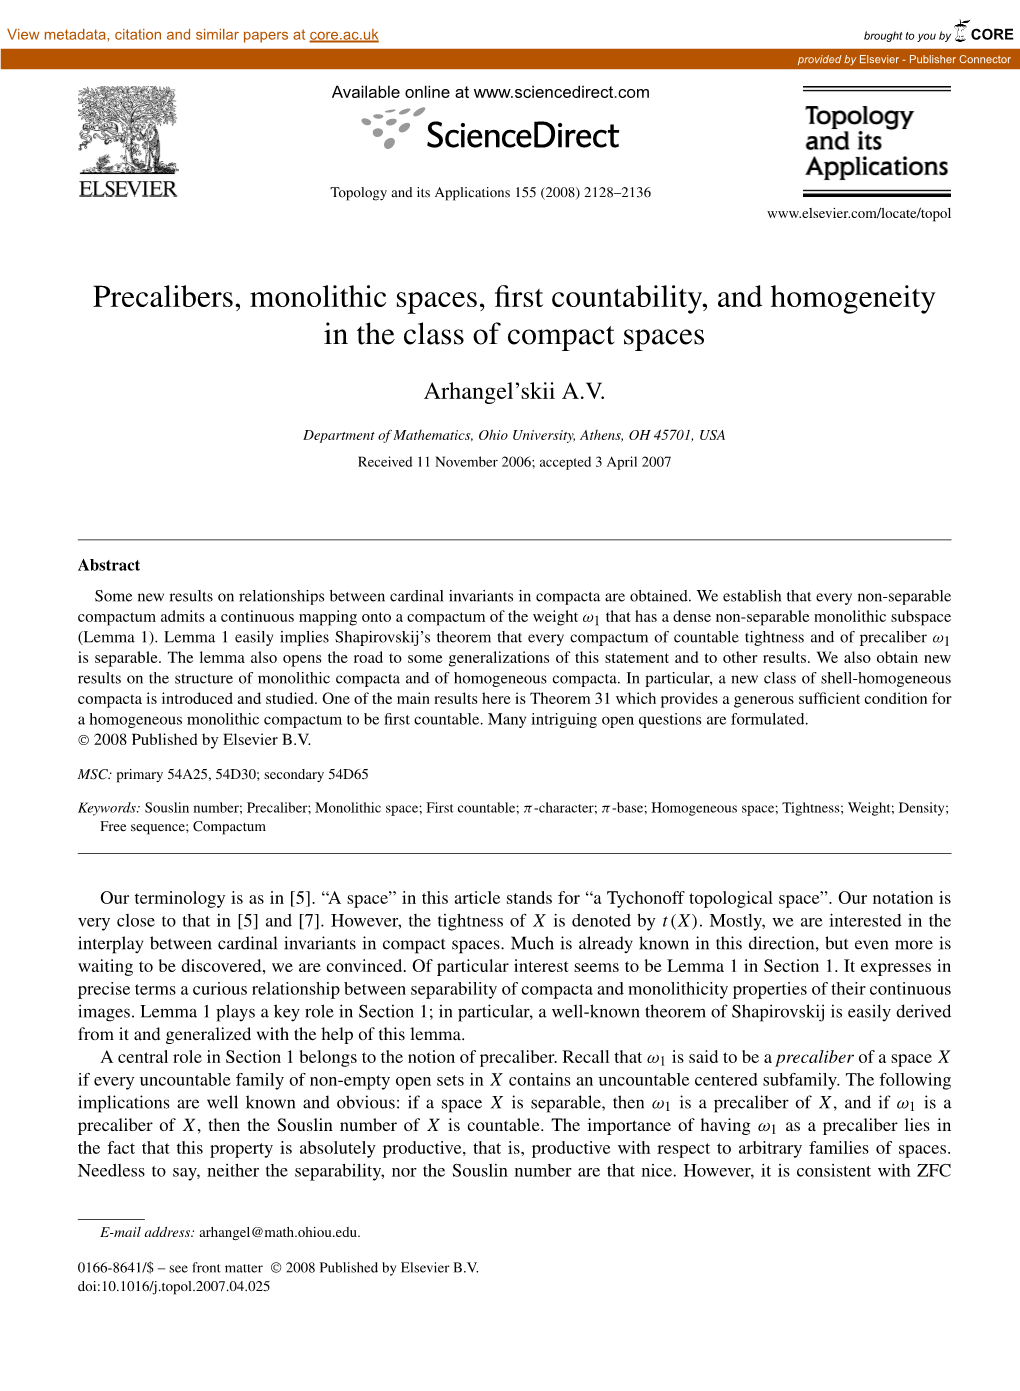 Precalibers, Monolithic Spaces, First Countability, and Homogeneity In